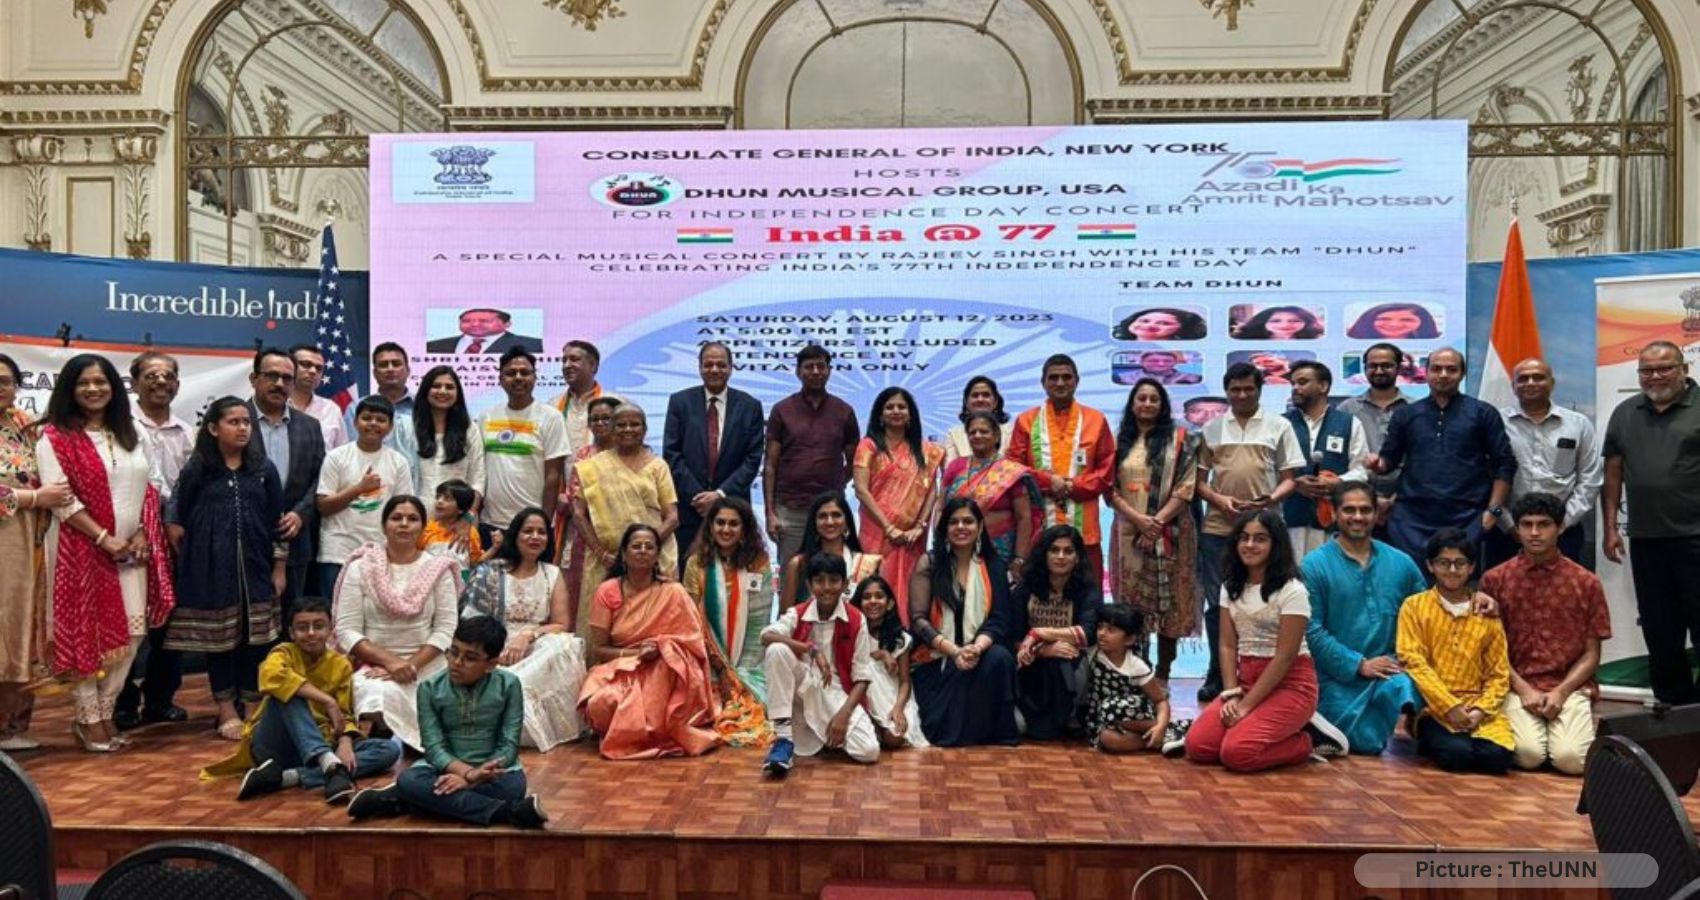 Musical Concert Held In NY Indian Consulate Celebrating Independence Day